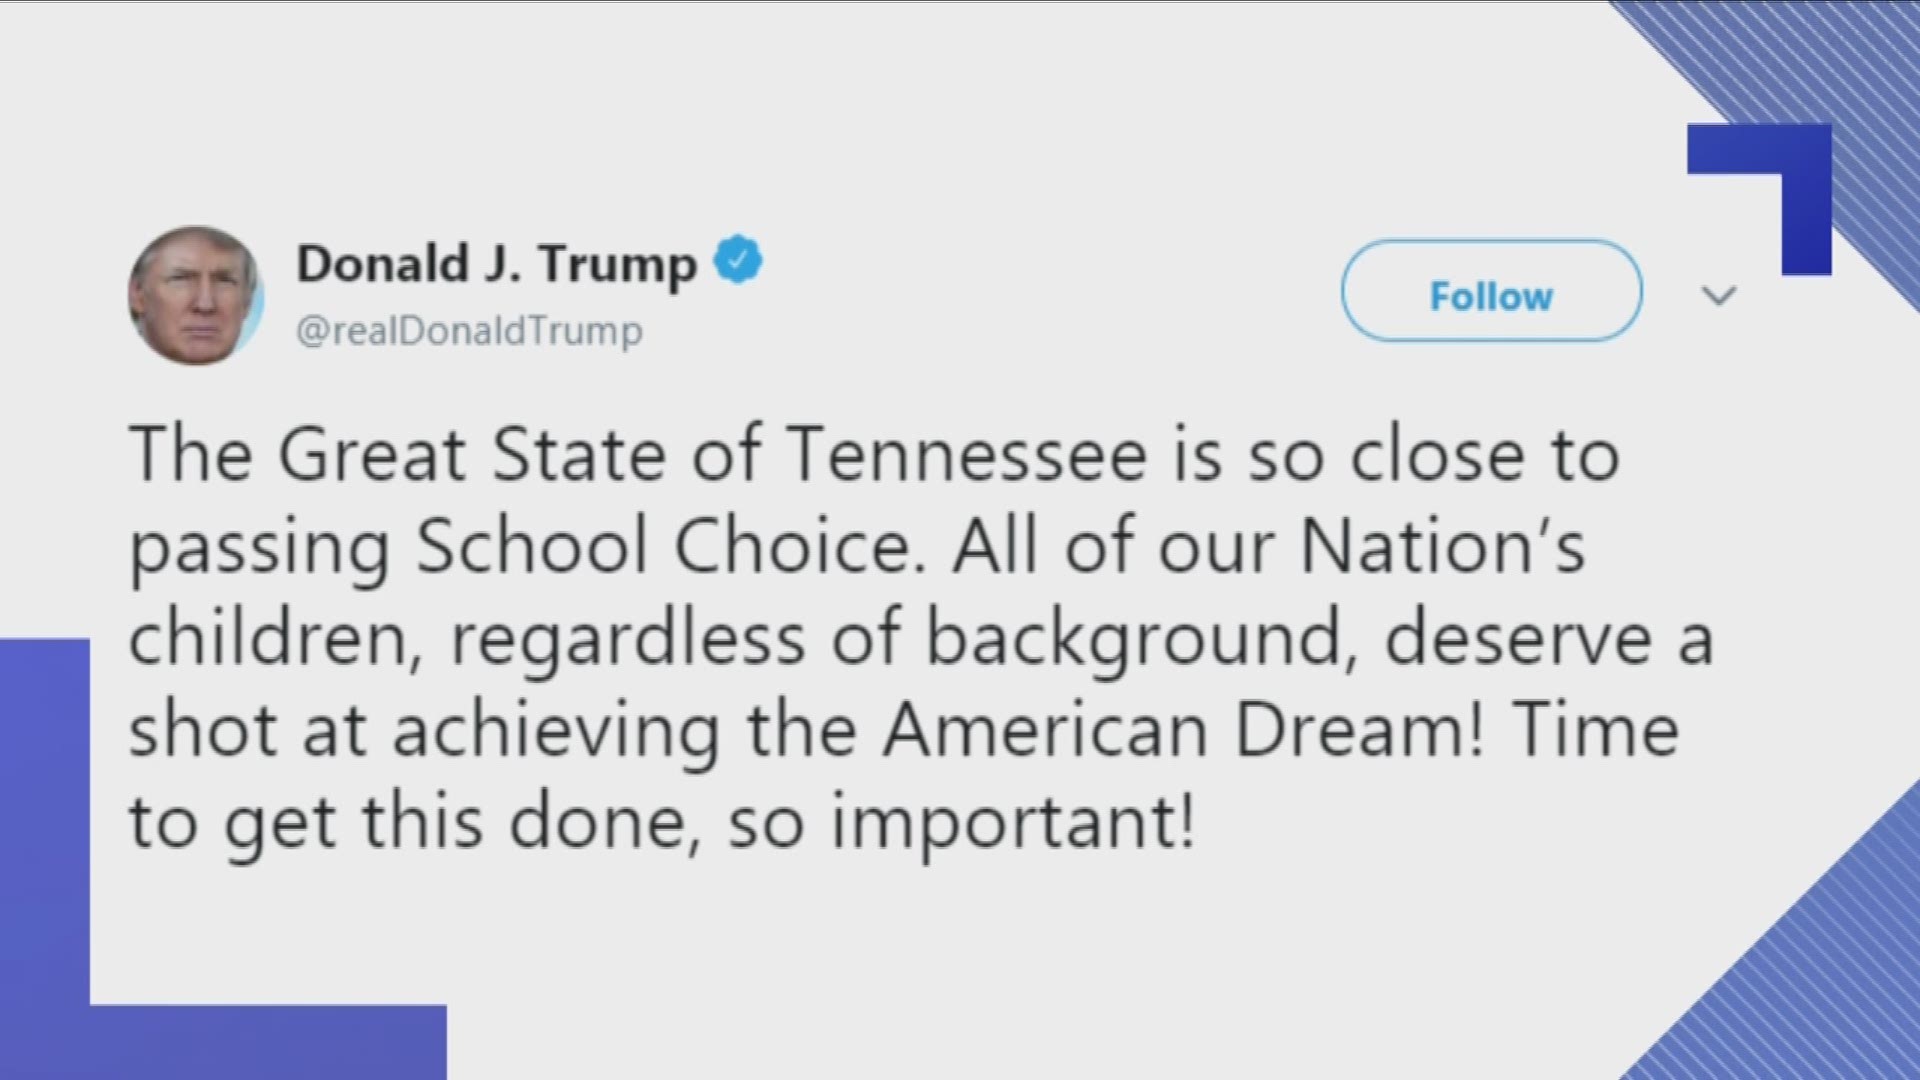 President trump is endorsing Tennessee's controversial school voucher plan.